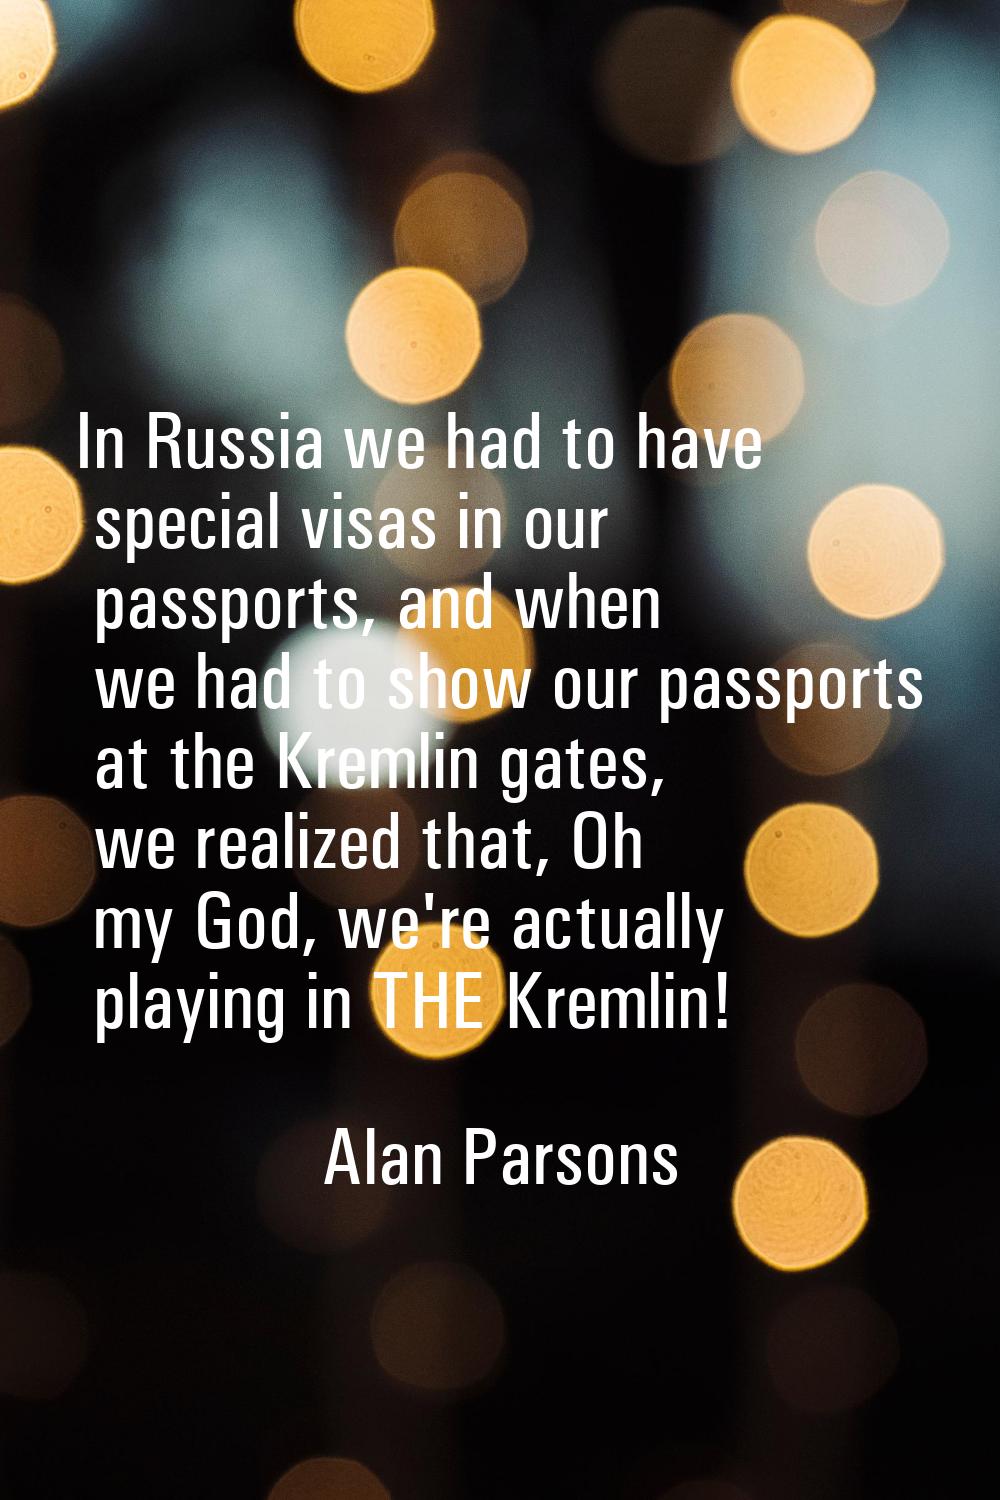 In Russia we had to have special visas in our passports, and when we had to show our passports at t